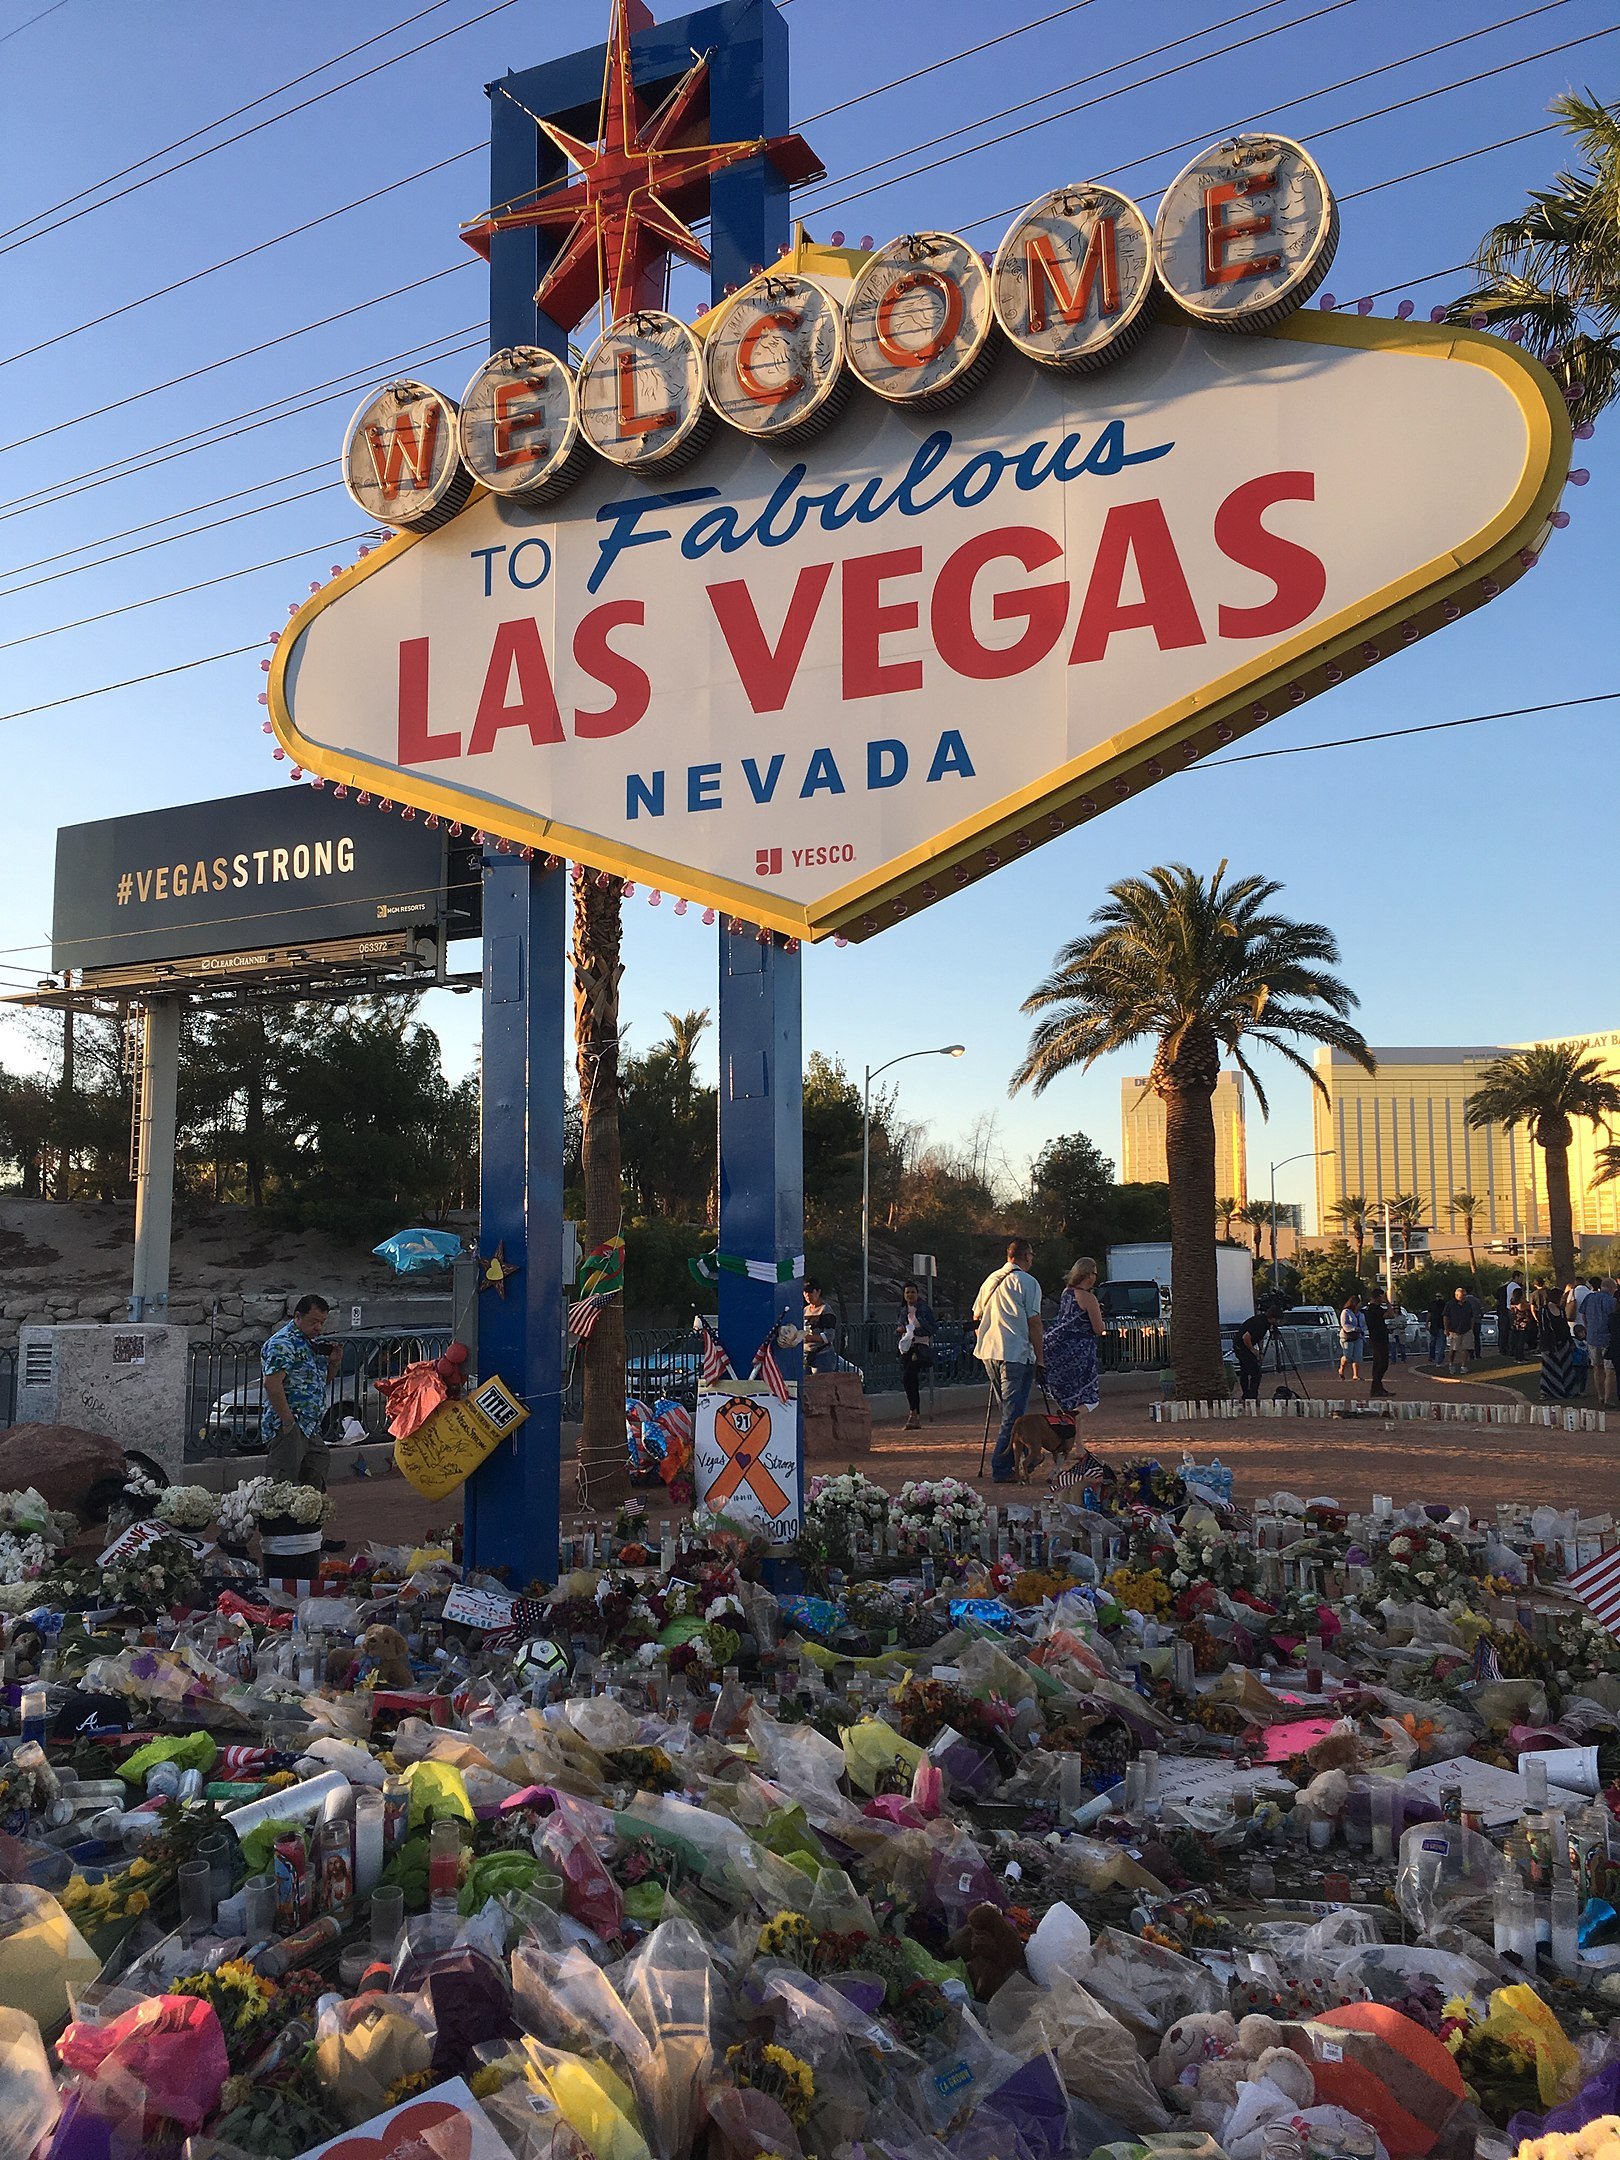 The "Welcome to Fabulous Las Vegas" sign adorned with flowers on October 9, 2017, a week after the mass shooting | Photo: Wikimedia/Rmvisuals/Lasvegassignflowers/CC BY-SA 4.0